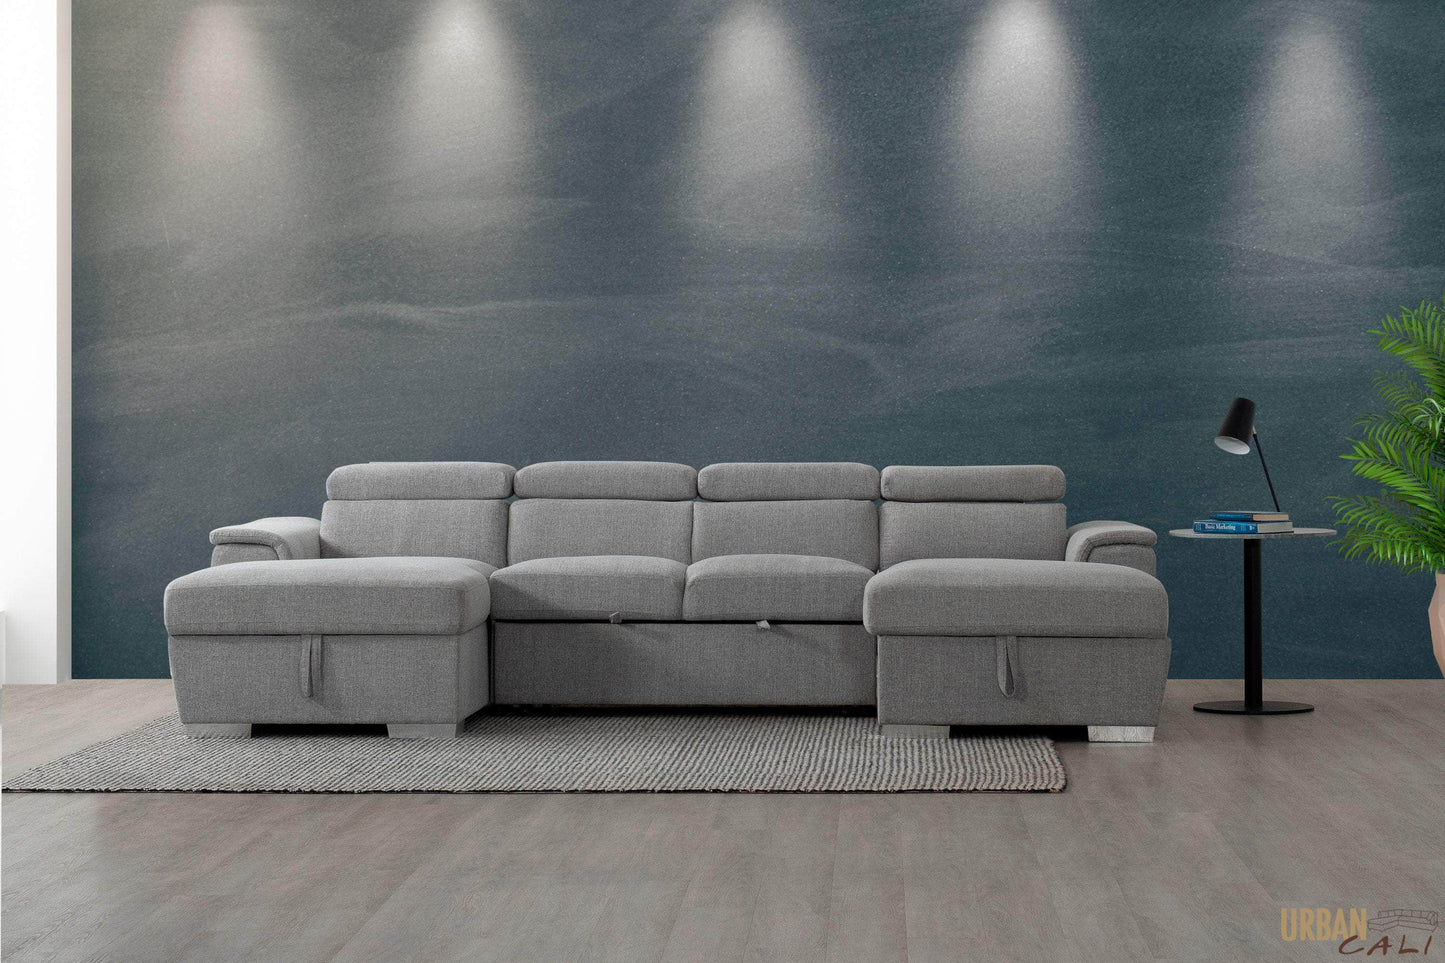 Urban Cali Sectional Bel Air Modular U-Shaped Sleeper Sectional Sofa with Storage Chaises in Thora Stone